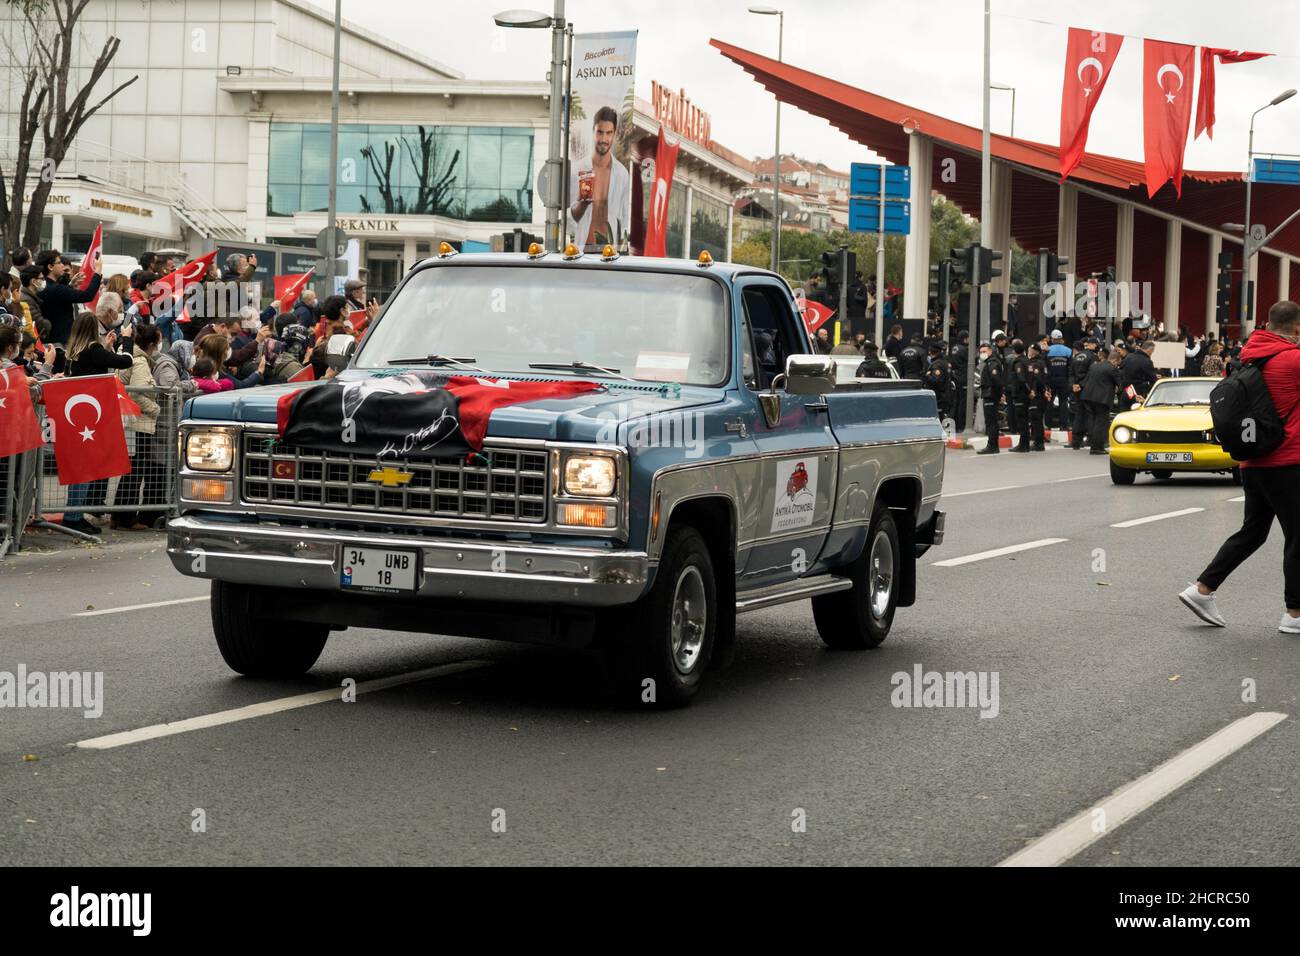 Istanbul, Turkey - October 29, 2021: Side view of a Chevrolet Silverado pick-up which produced in 1980. on the celebrations of republic day of Turkey. Stock Photo